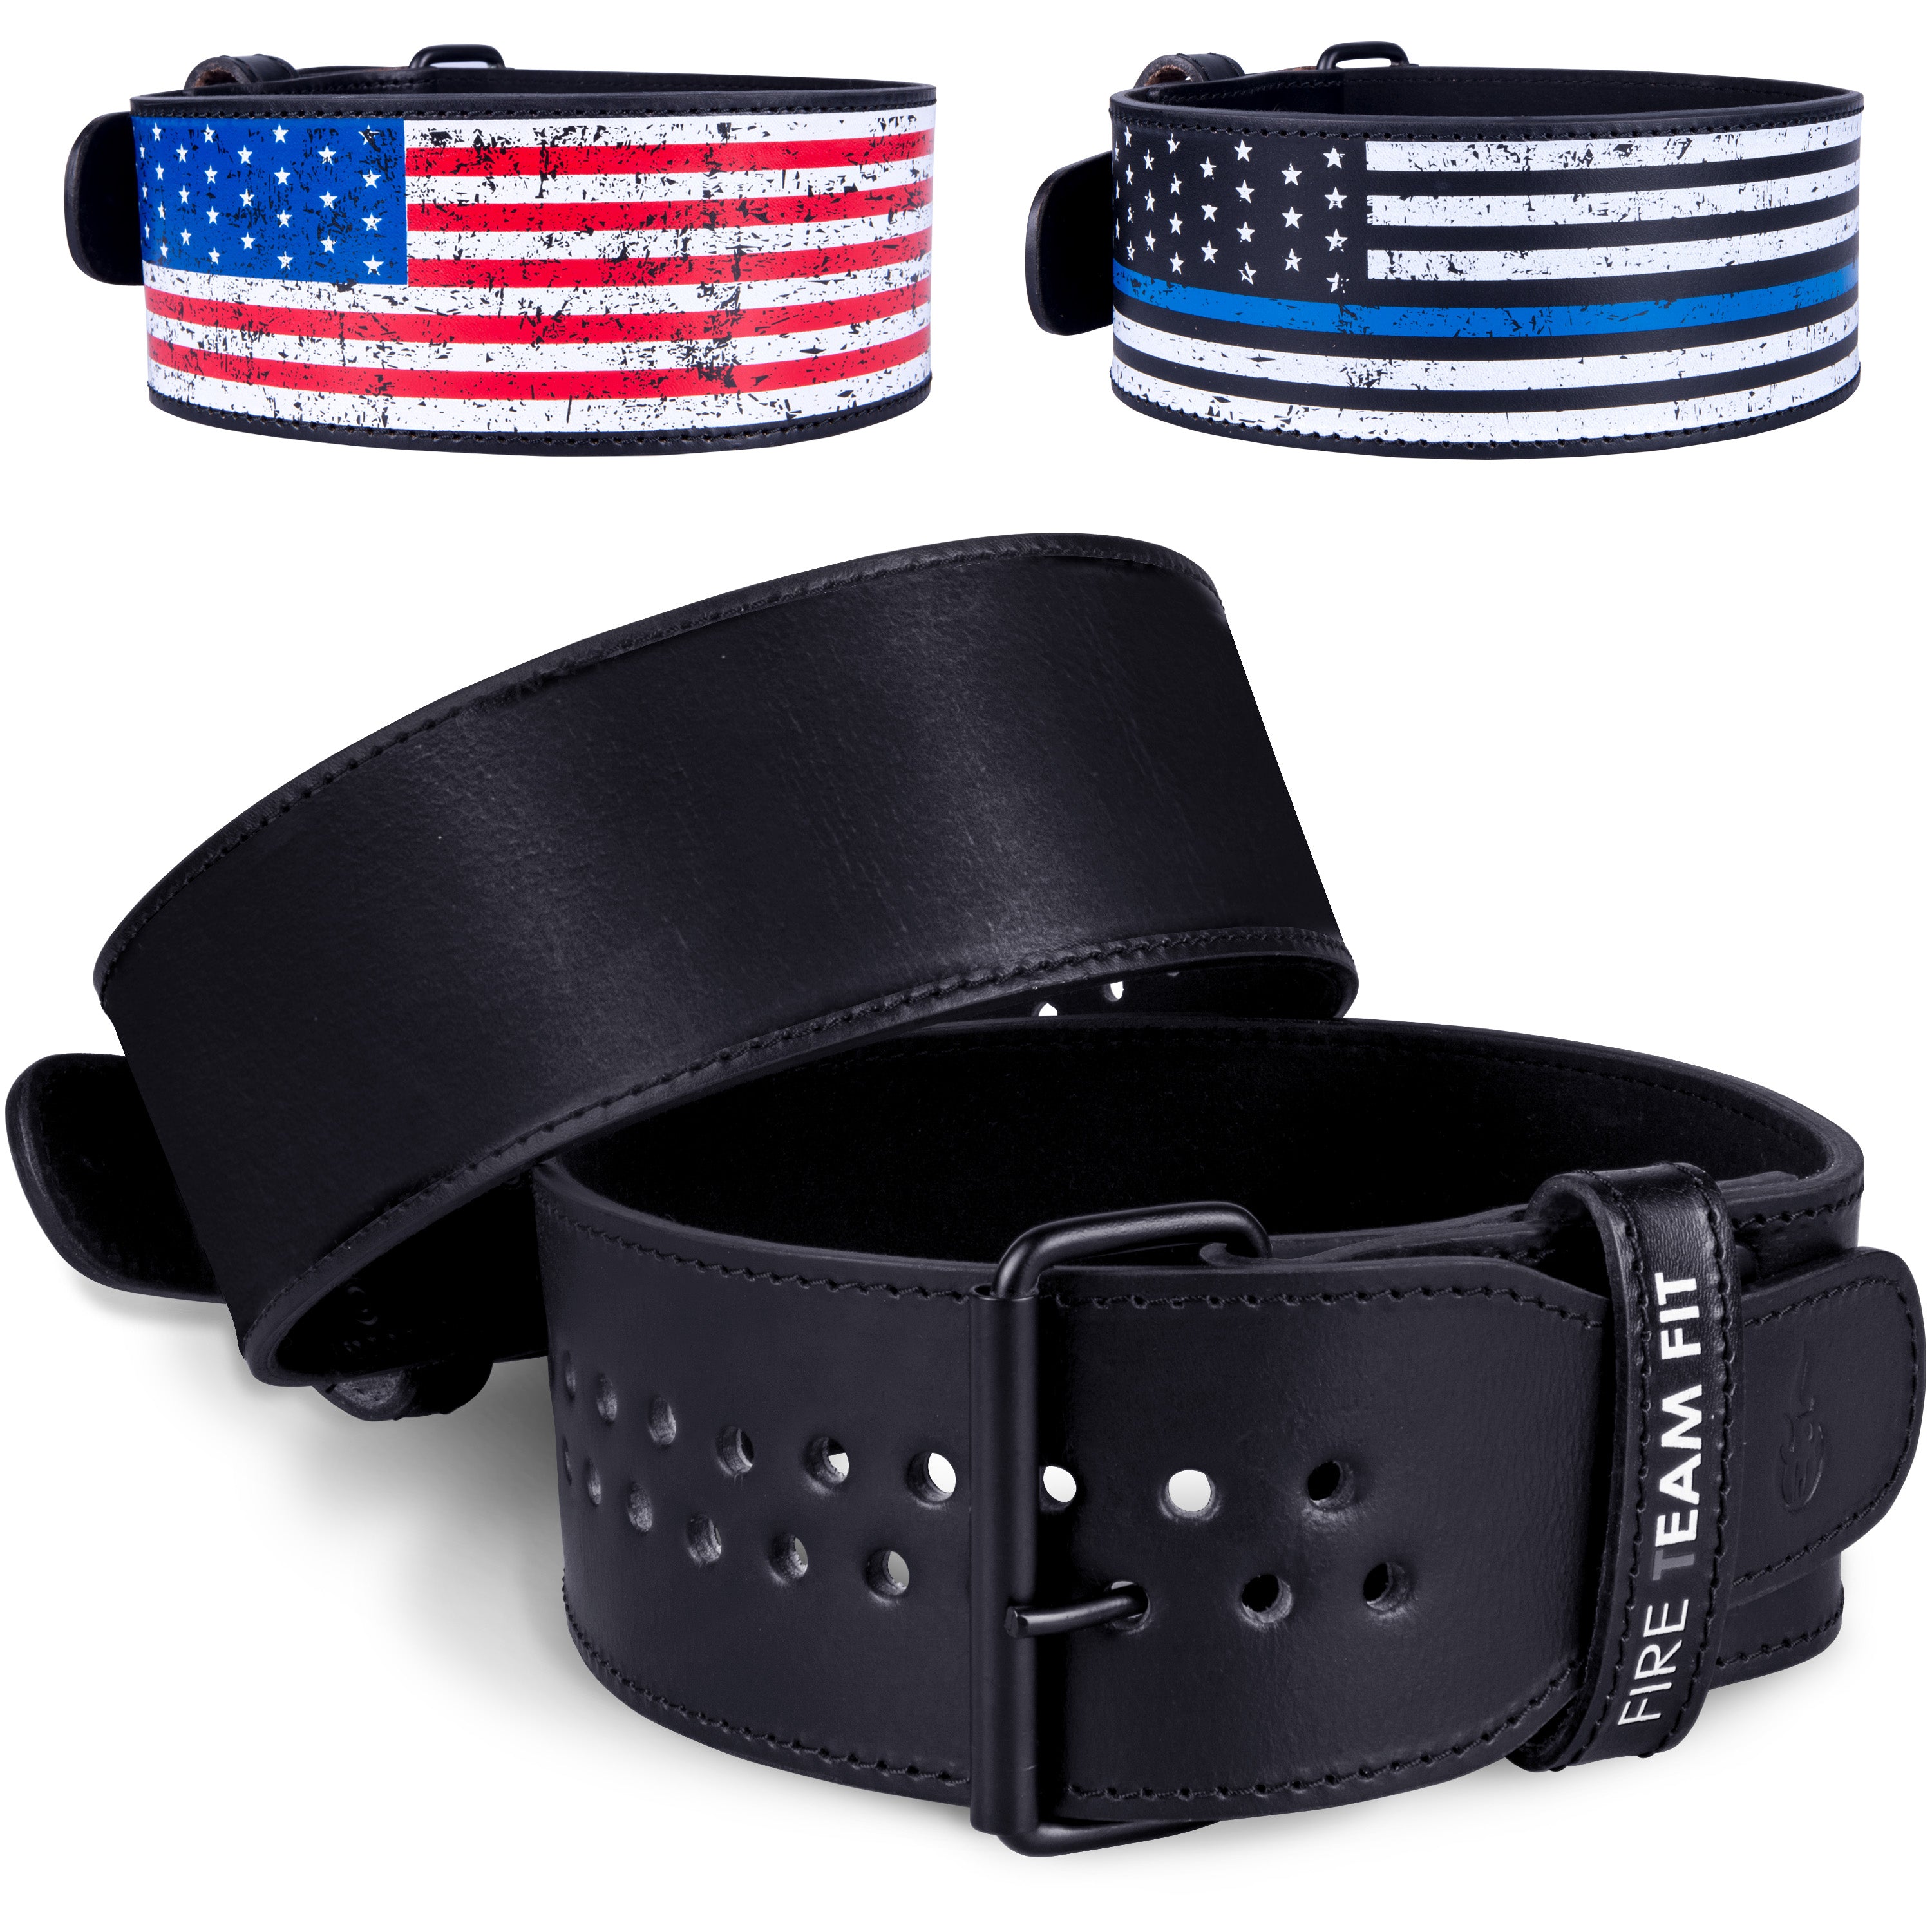 Fire Team Fit Single Prong Leather Weightlifting Belt